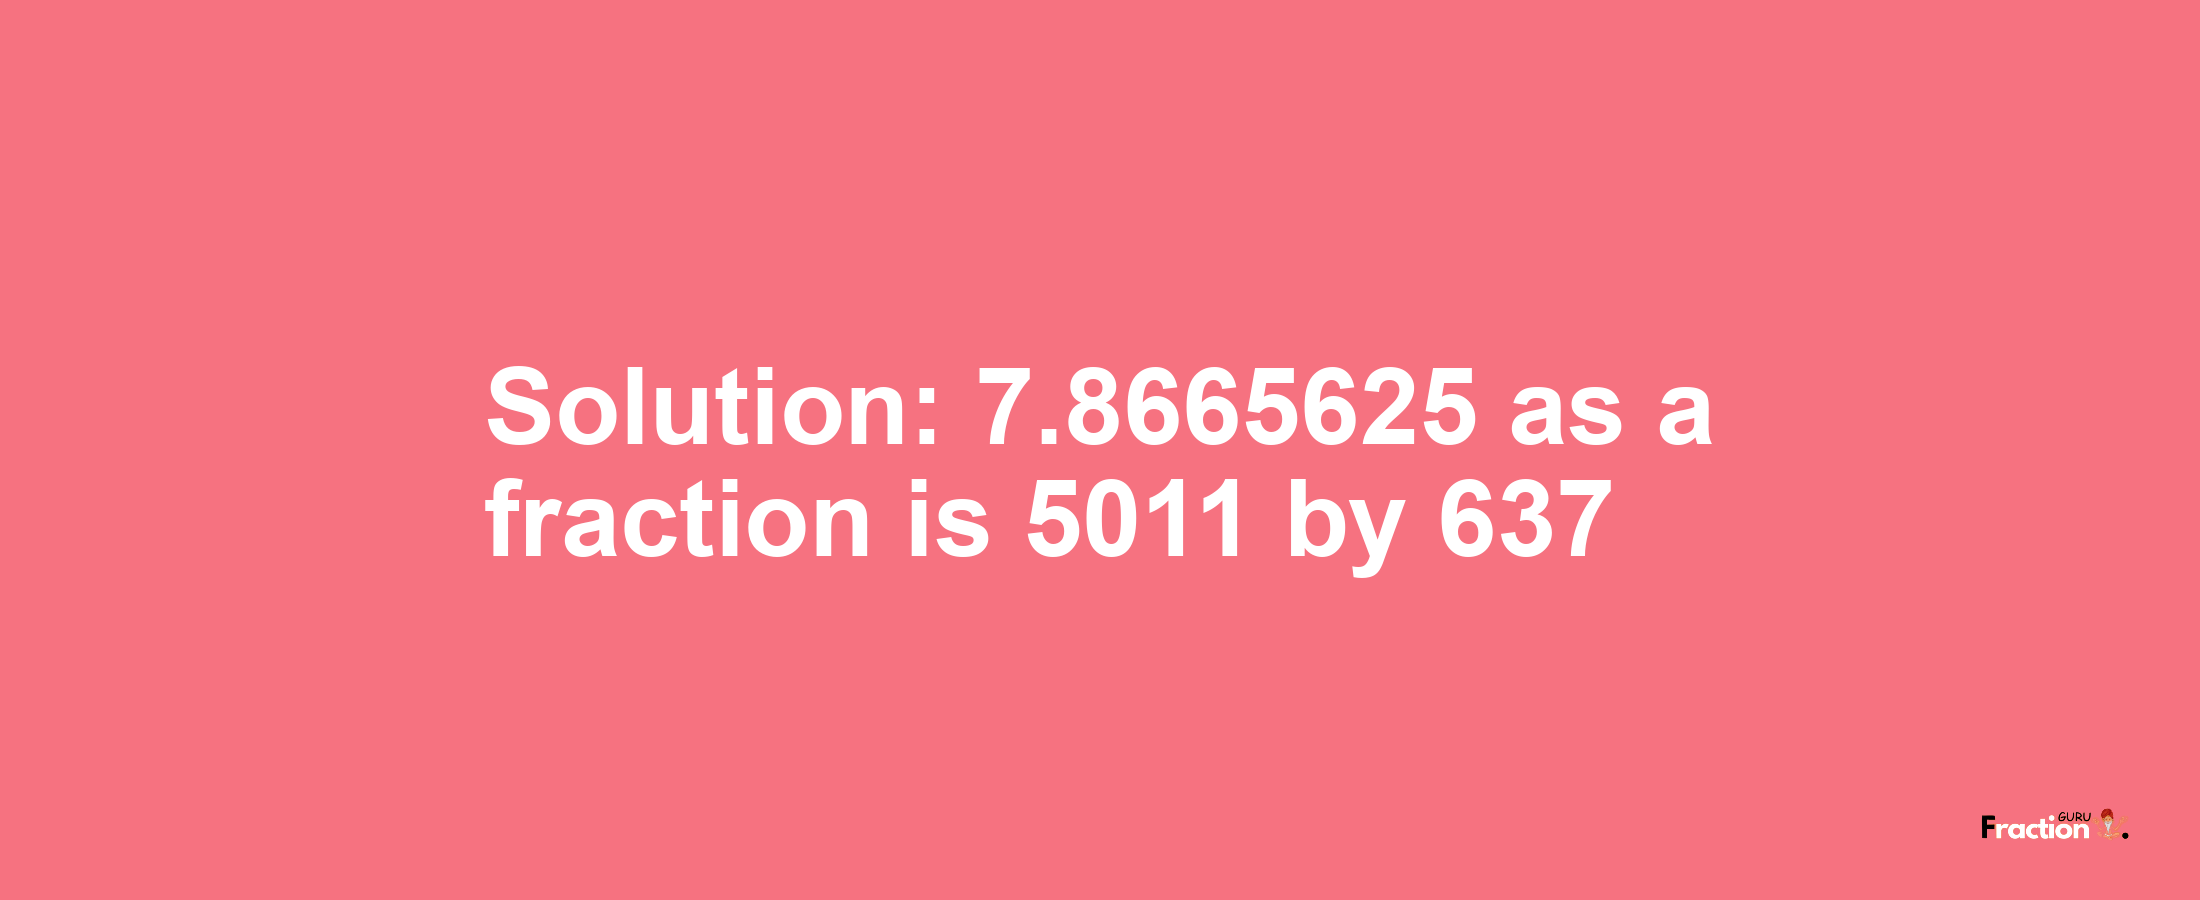 Solution:7.8665625 as a fraction is 5011/637